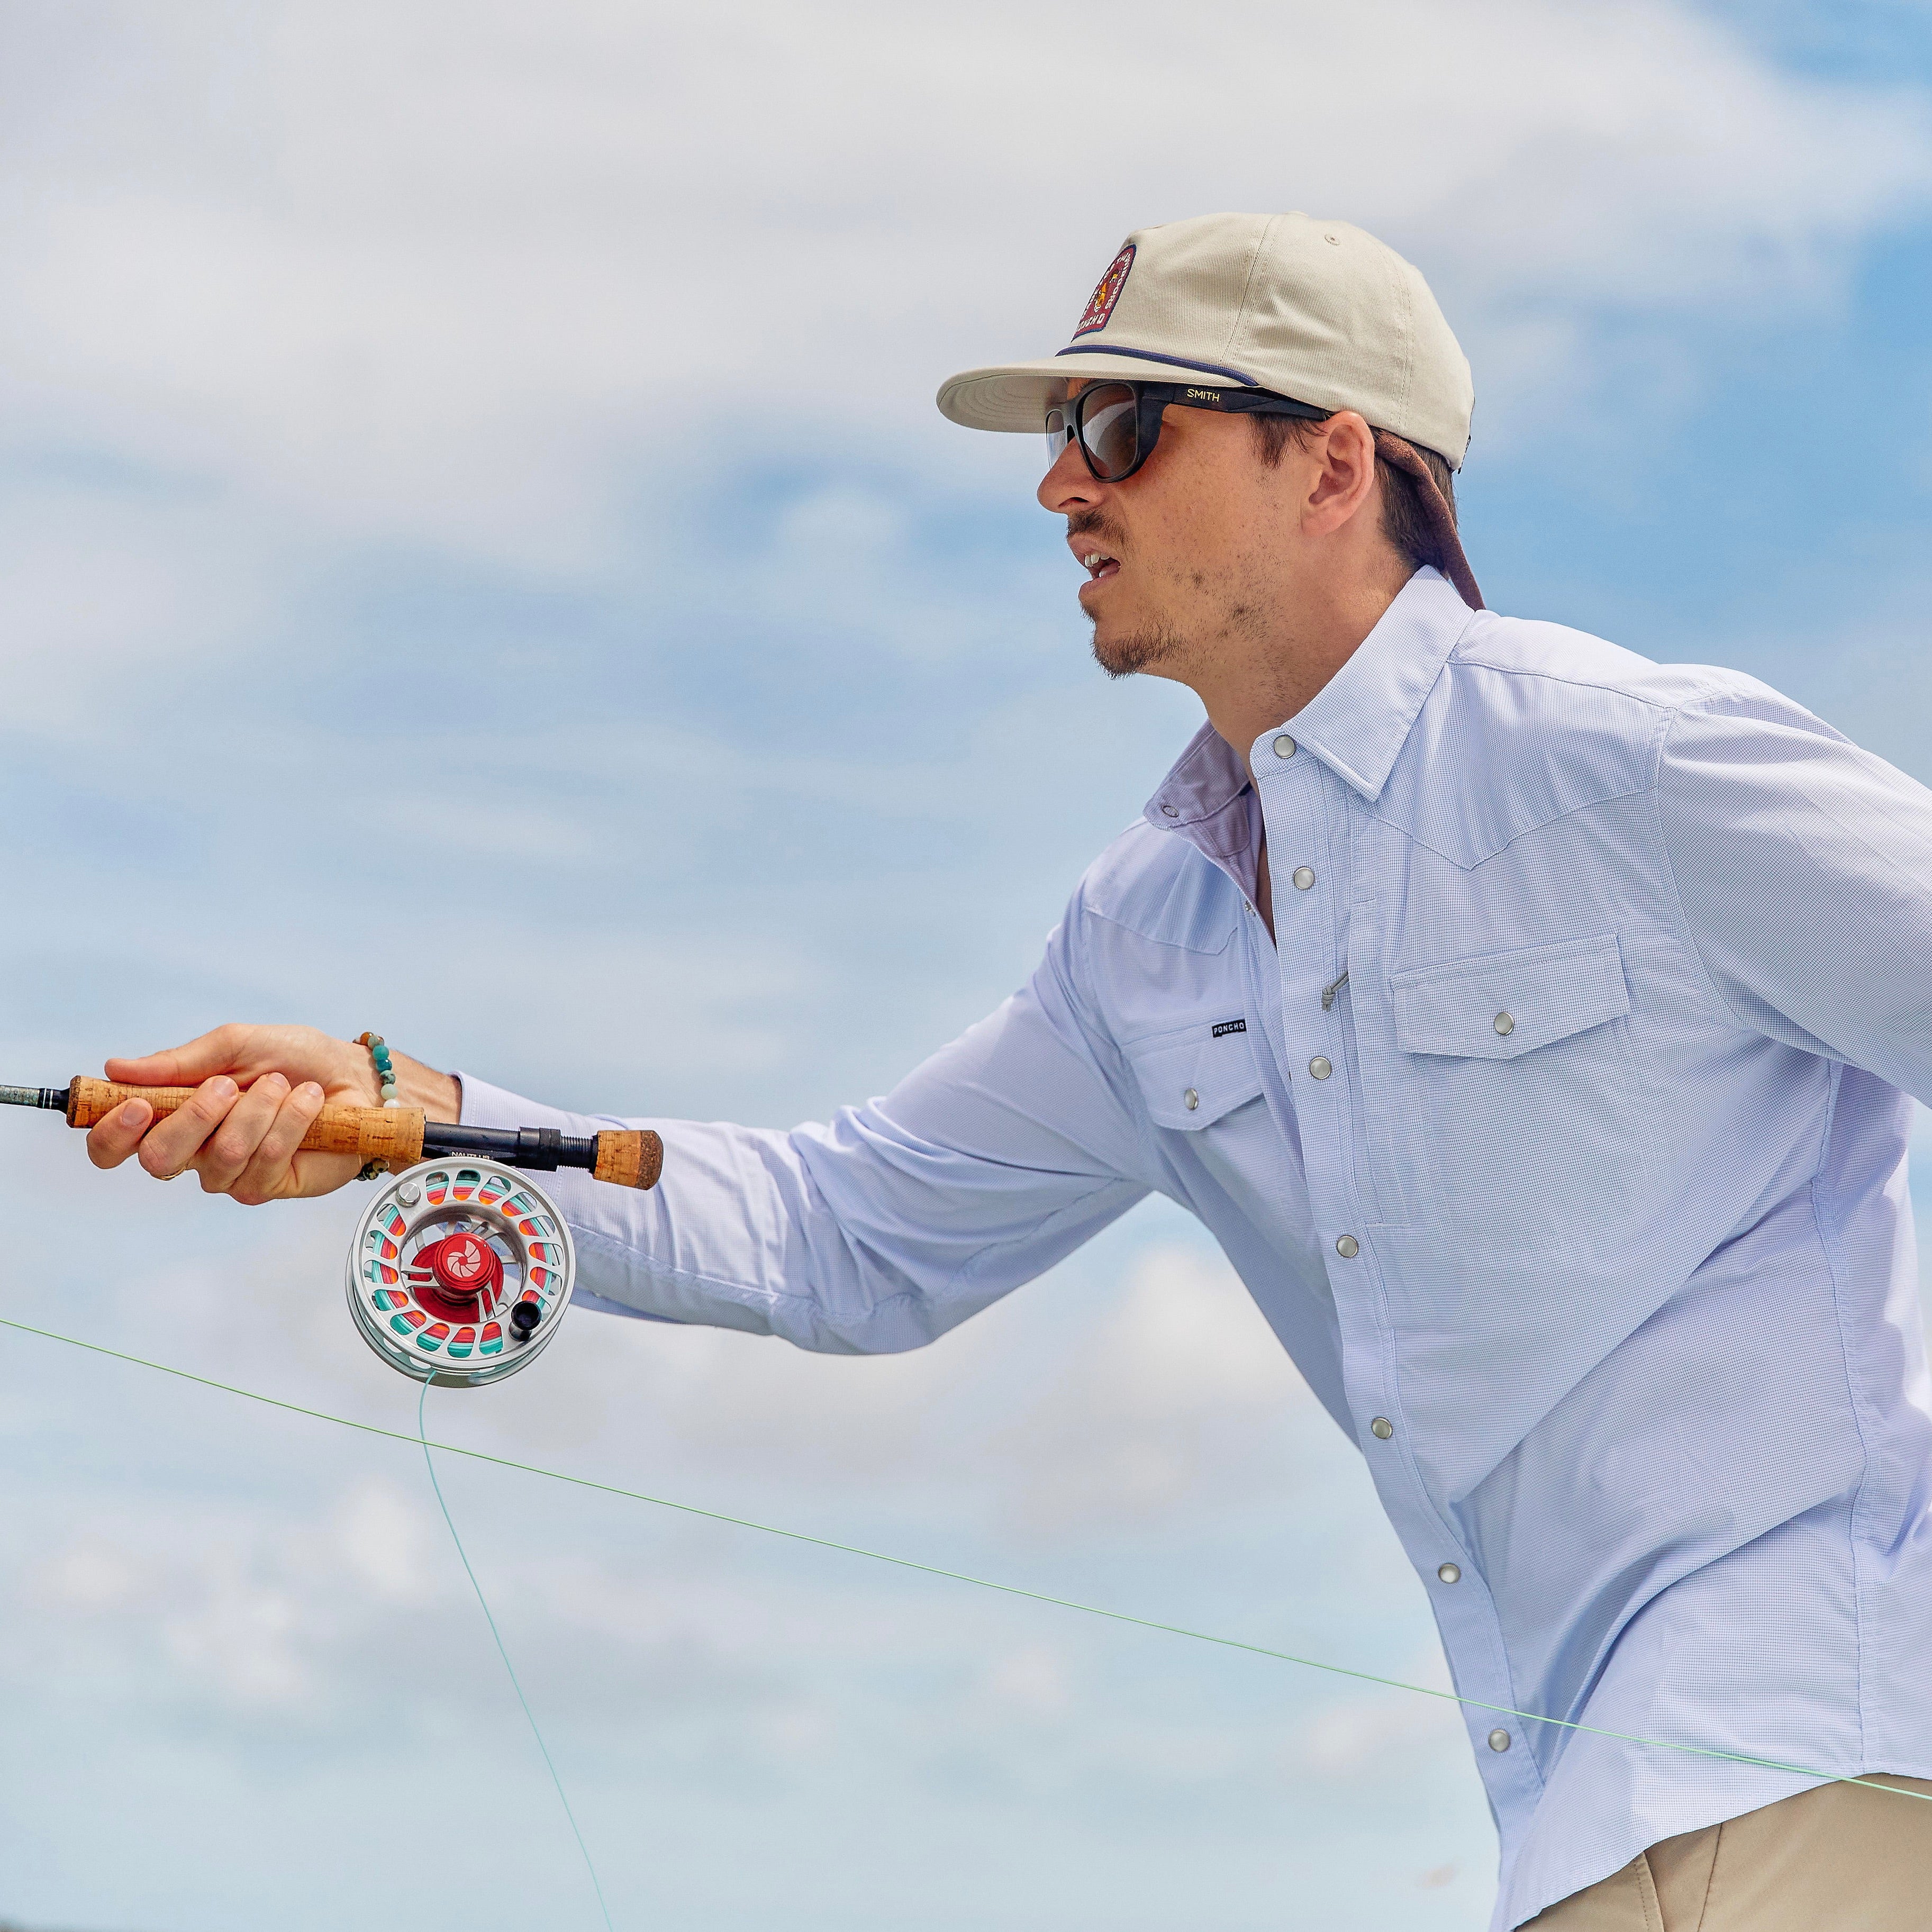 Man casts fly rod while wearing a microcheckered blue and white button down western/performance shirt with pearl snaps